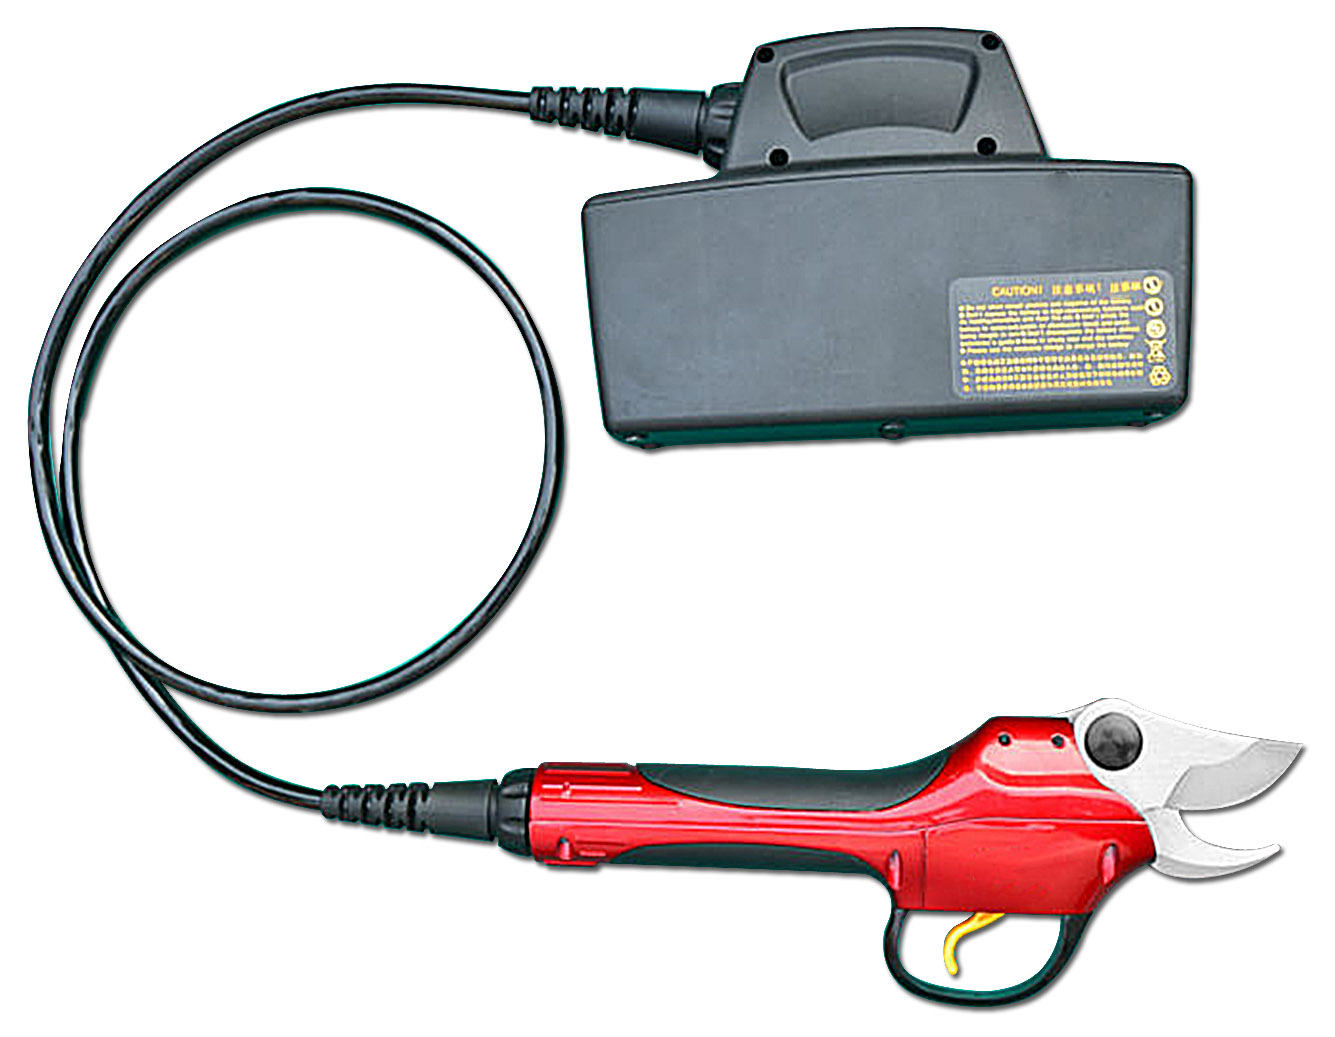 Zenport SCA Repair 1-Hour Service on Battery Powered Electric Shears - Click Image to Close